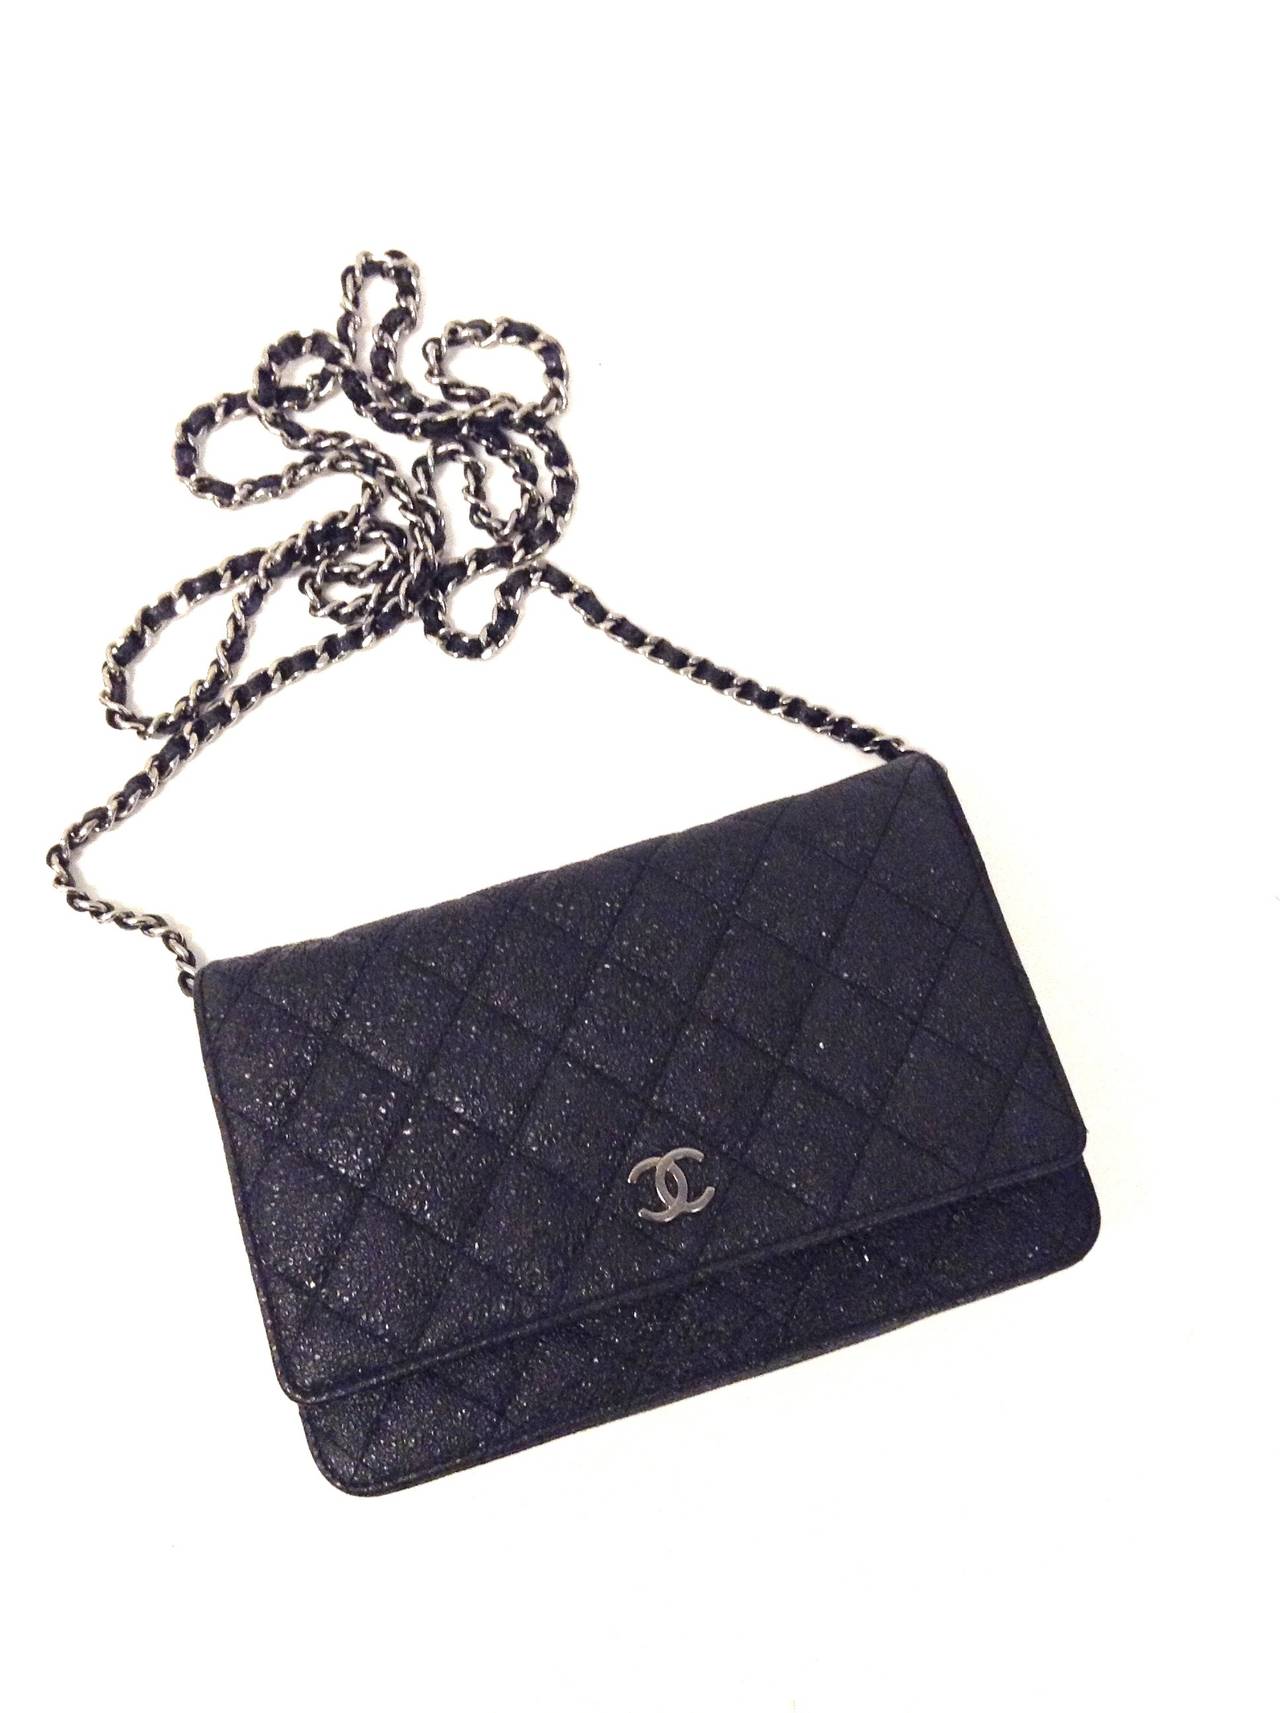 2008 Chanel Iridescent Black Matte Caviar Flap bag  RARE In Excellent Condition For Sale In Westmount, Quebec